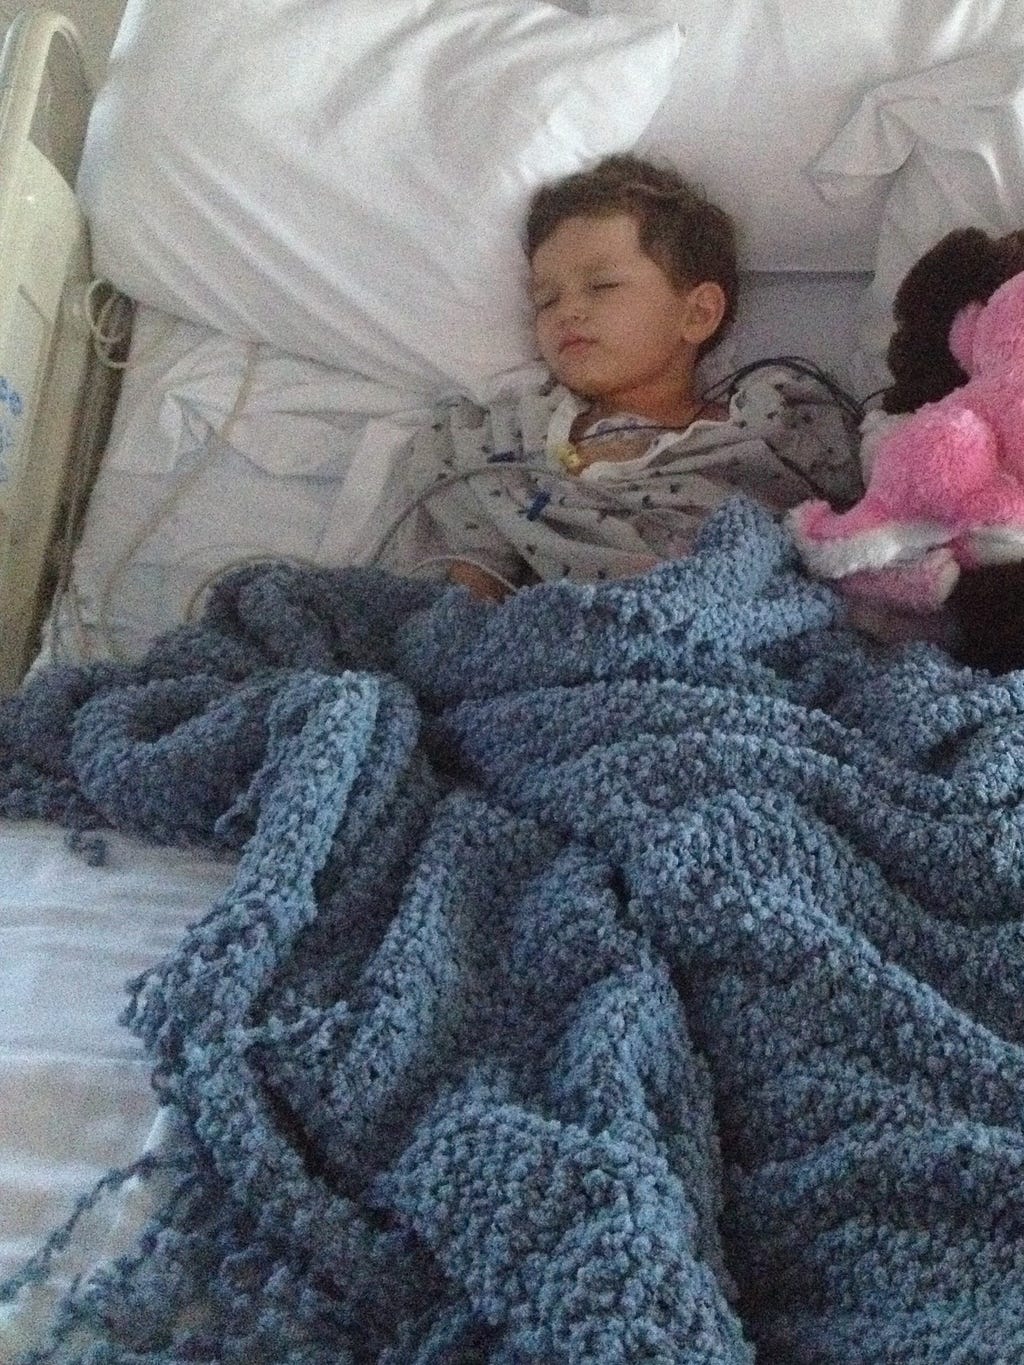 Little boy with cancer laying in bed.